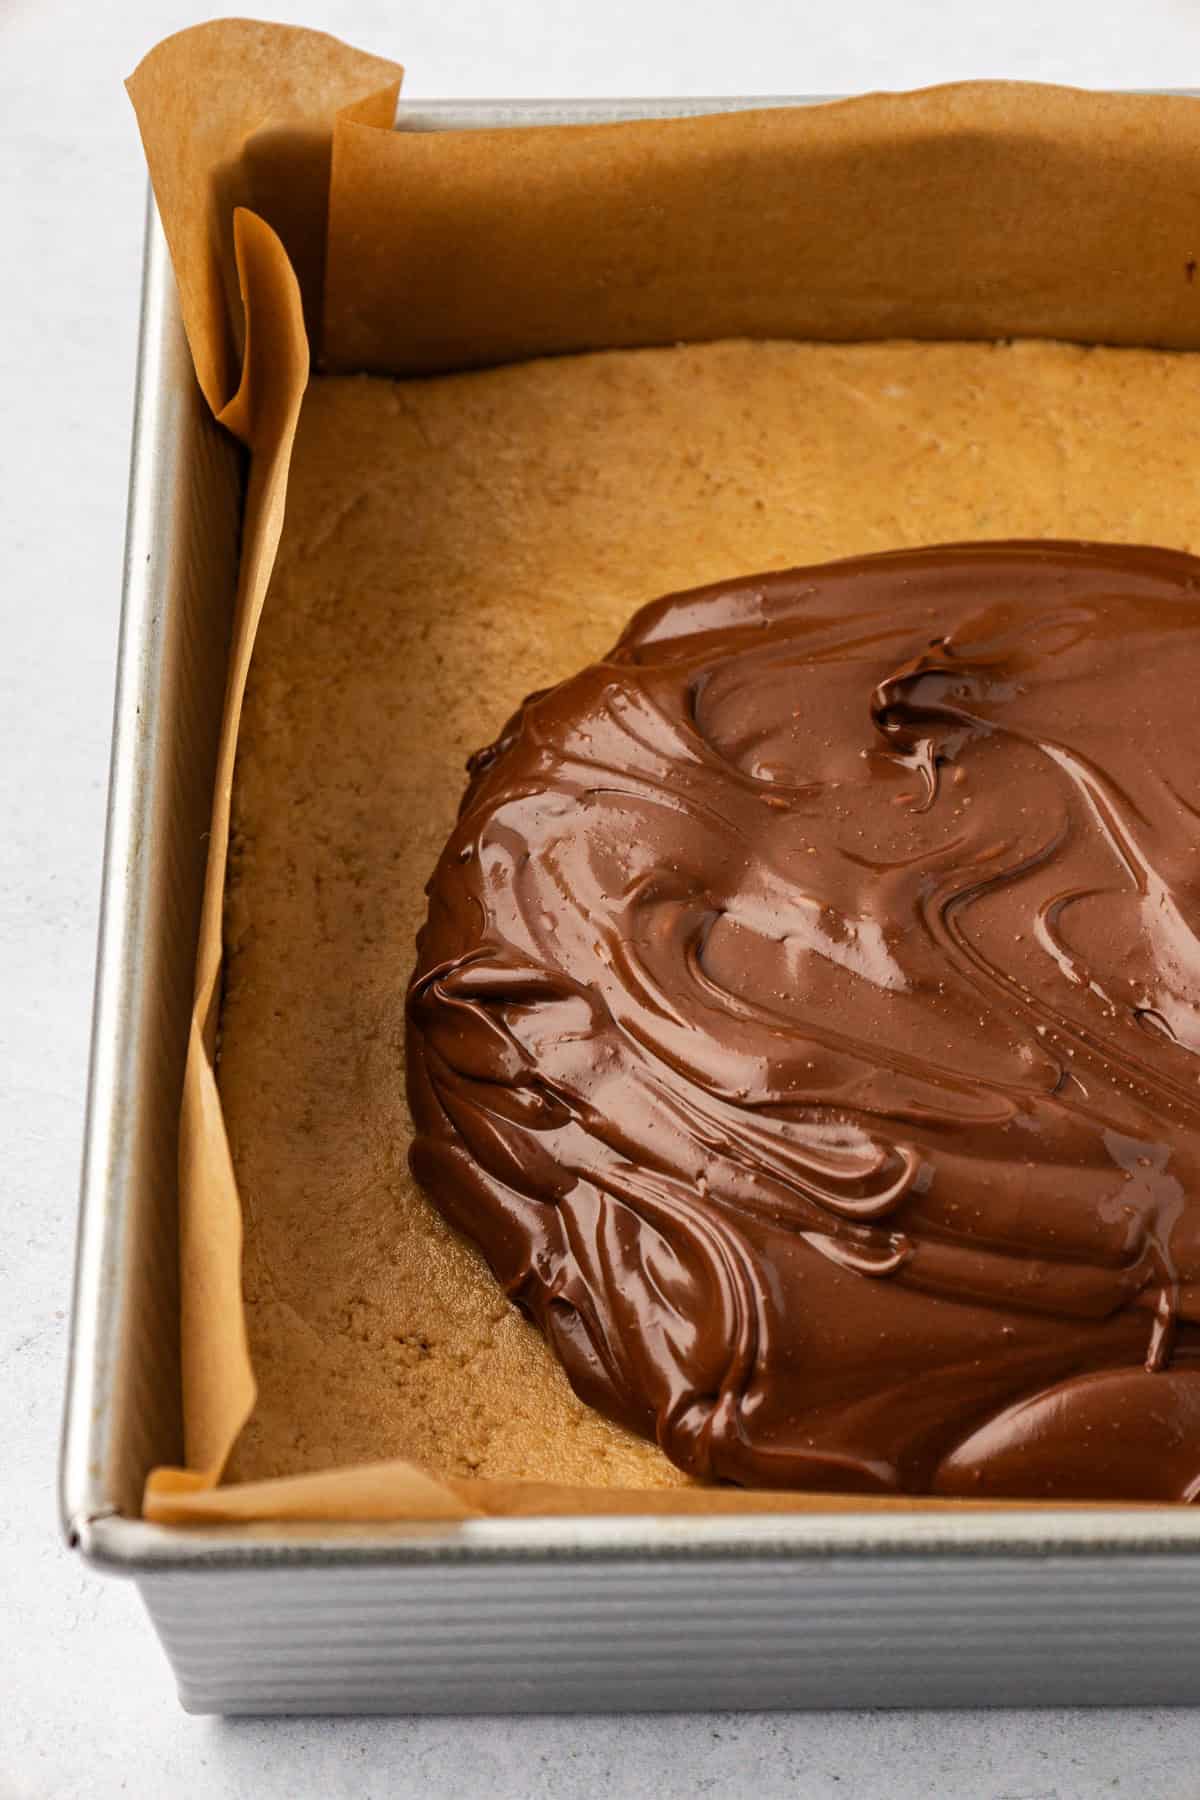 Close up of a square pan lined with brown parchment paper with a smooth peanut butter layer topped with a large dollop of a melted chocolate mixture